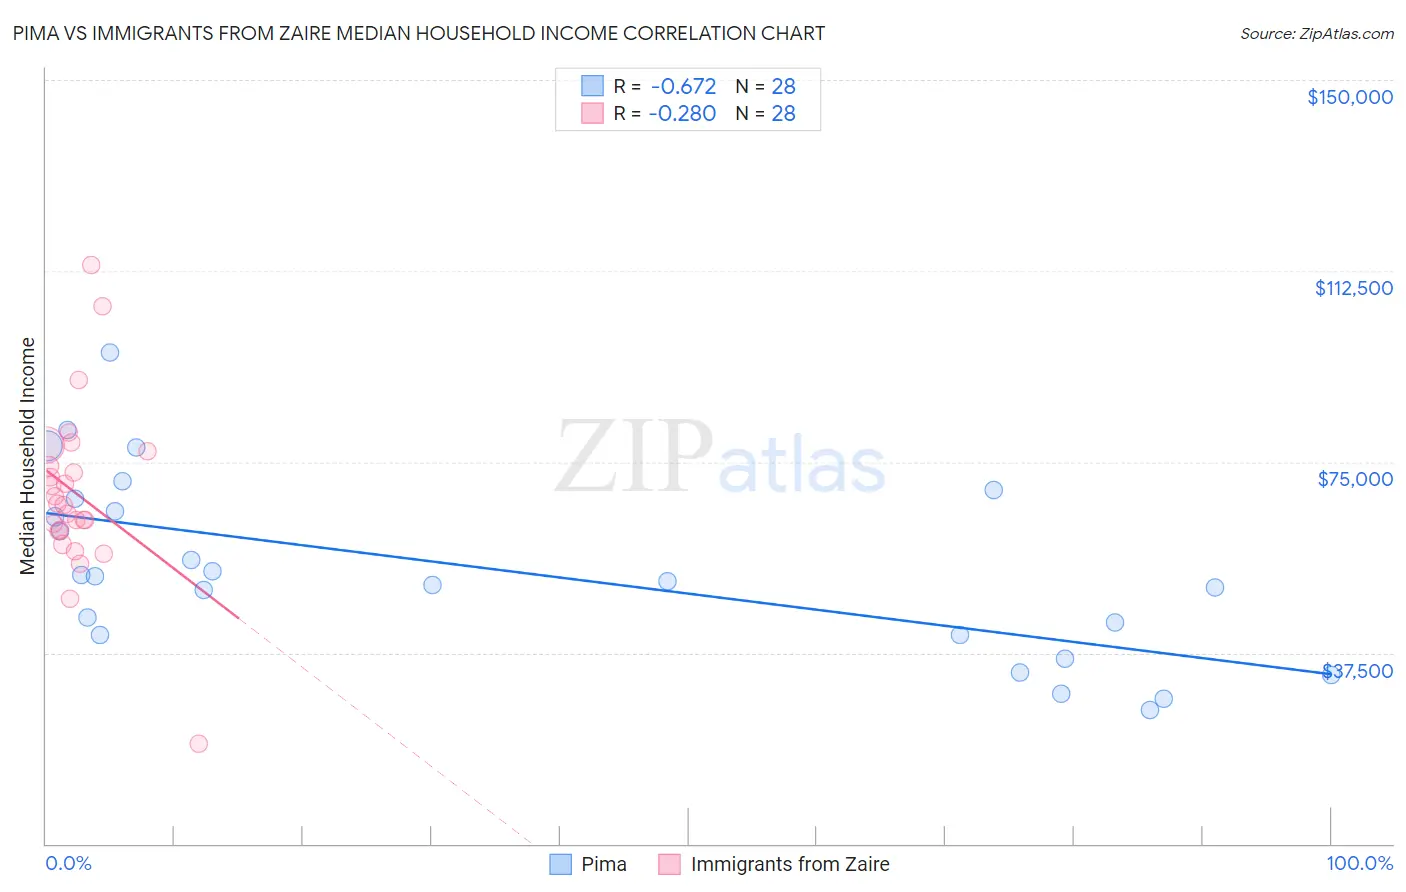 Pima vs Immigrants from Zaire Median Household Income